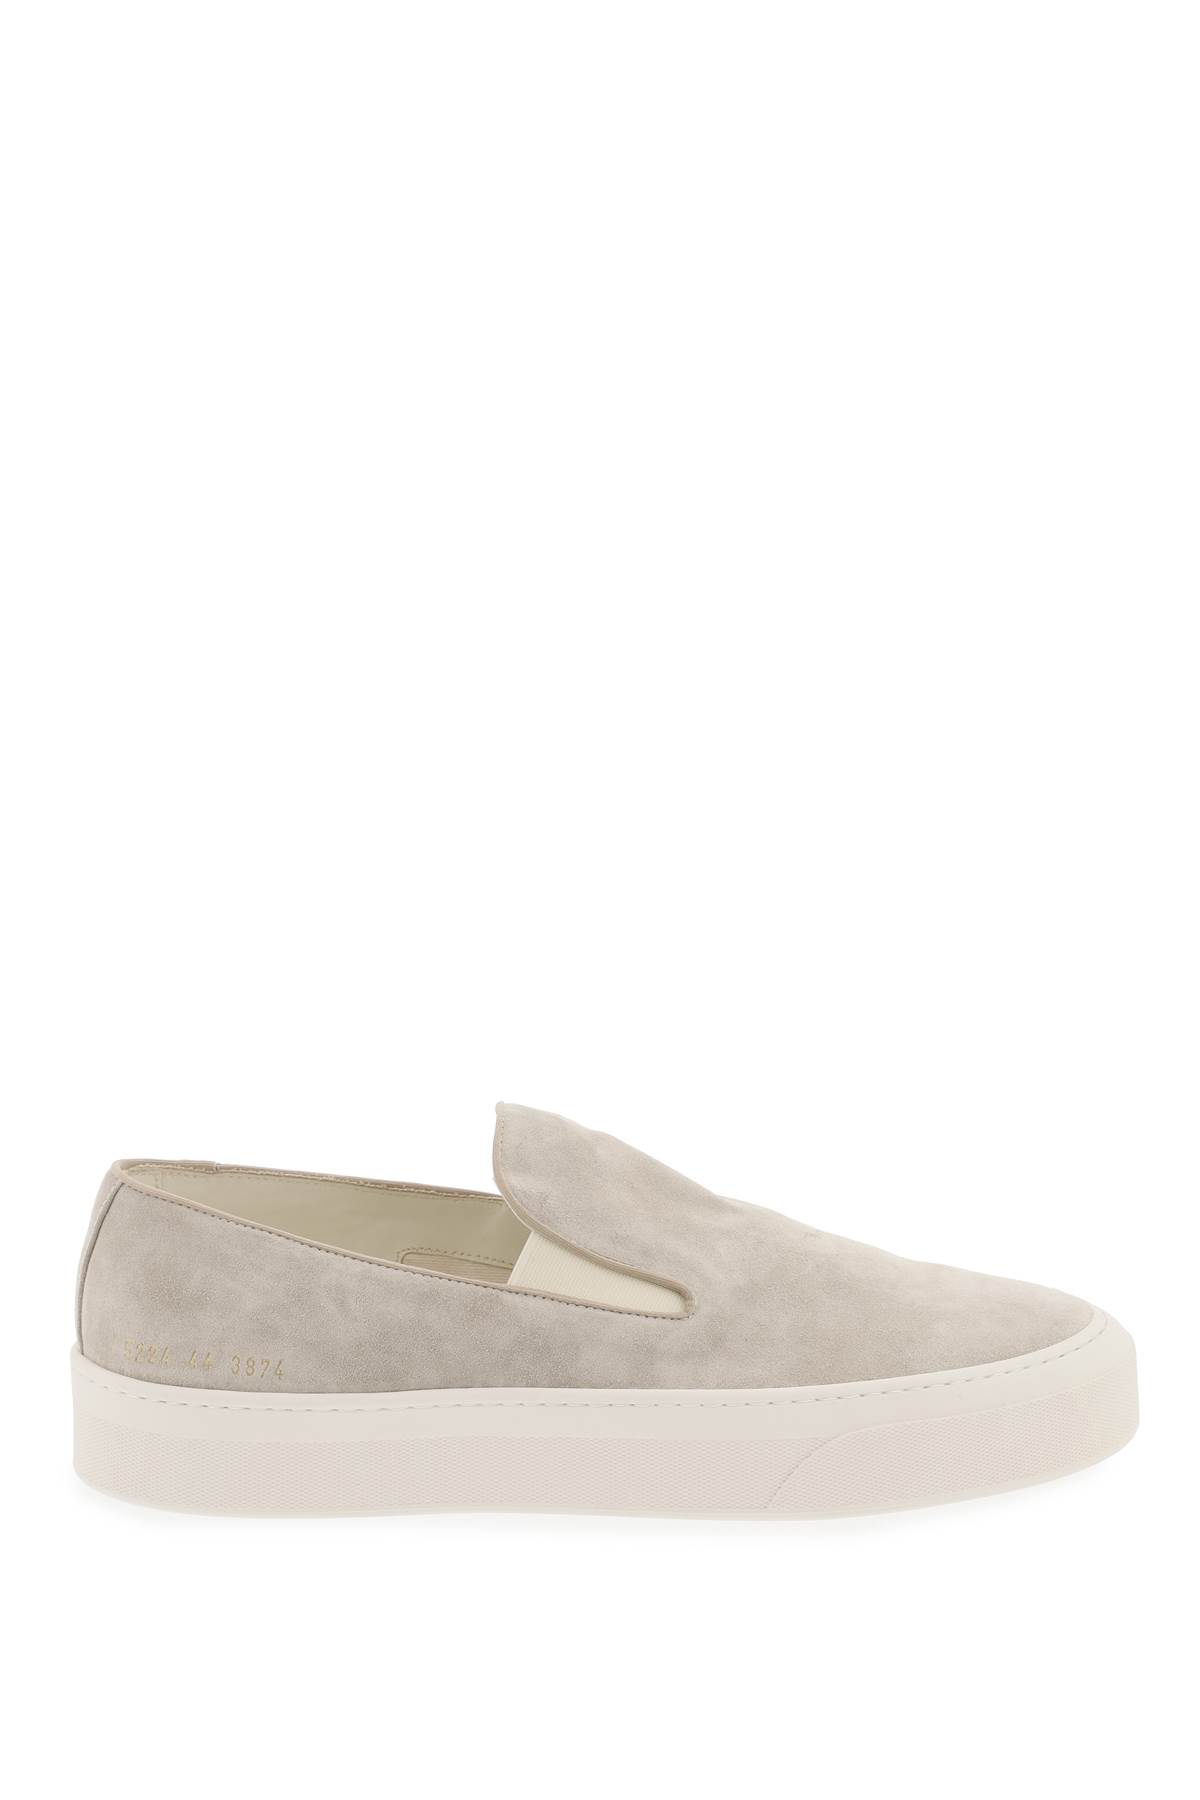 COMMON PROJECTS SLIP-ON SNEAKERS